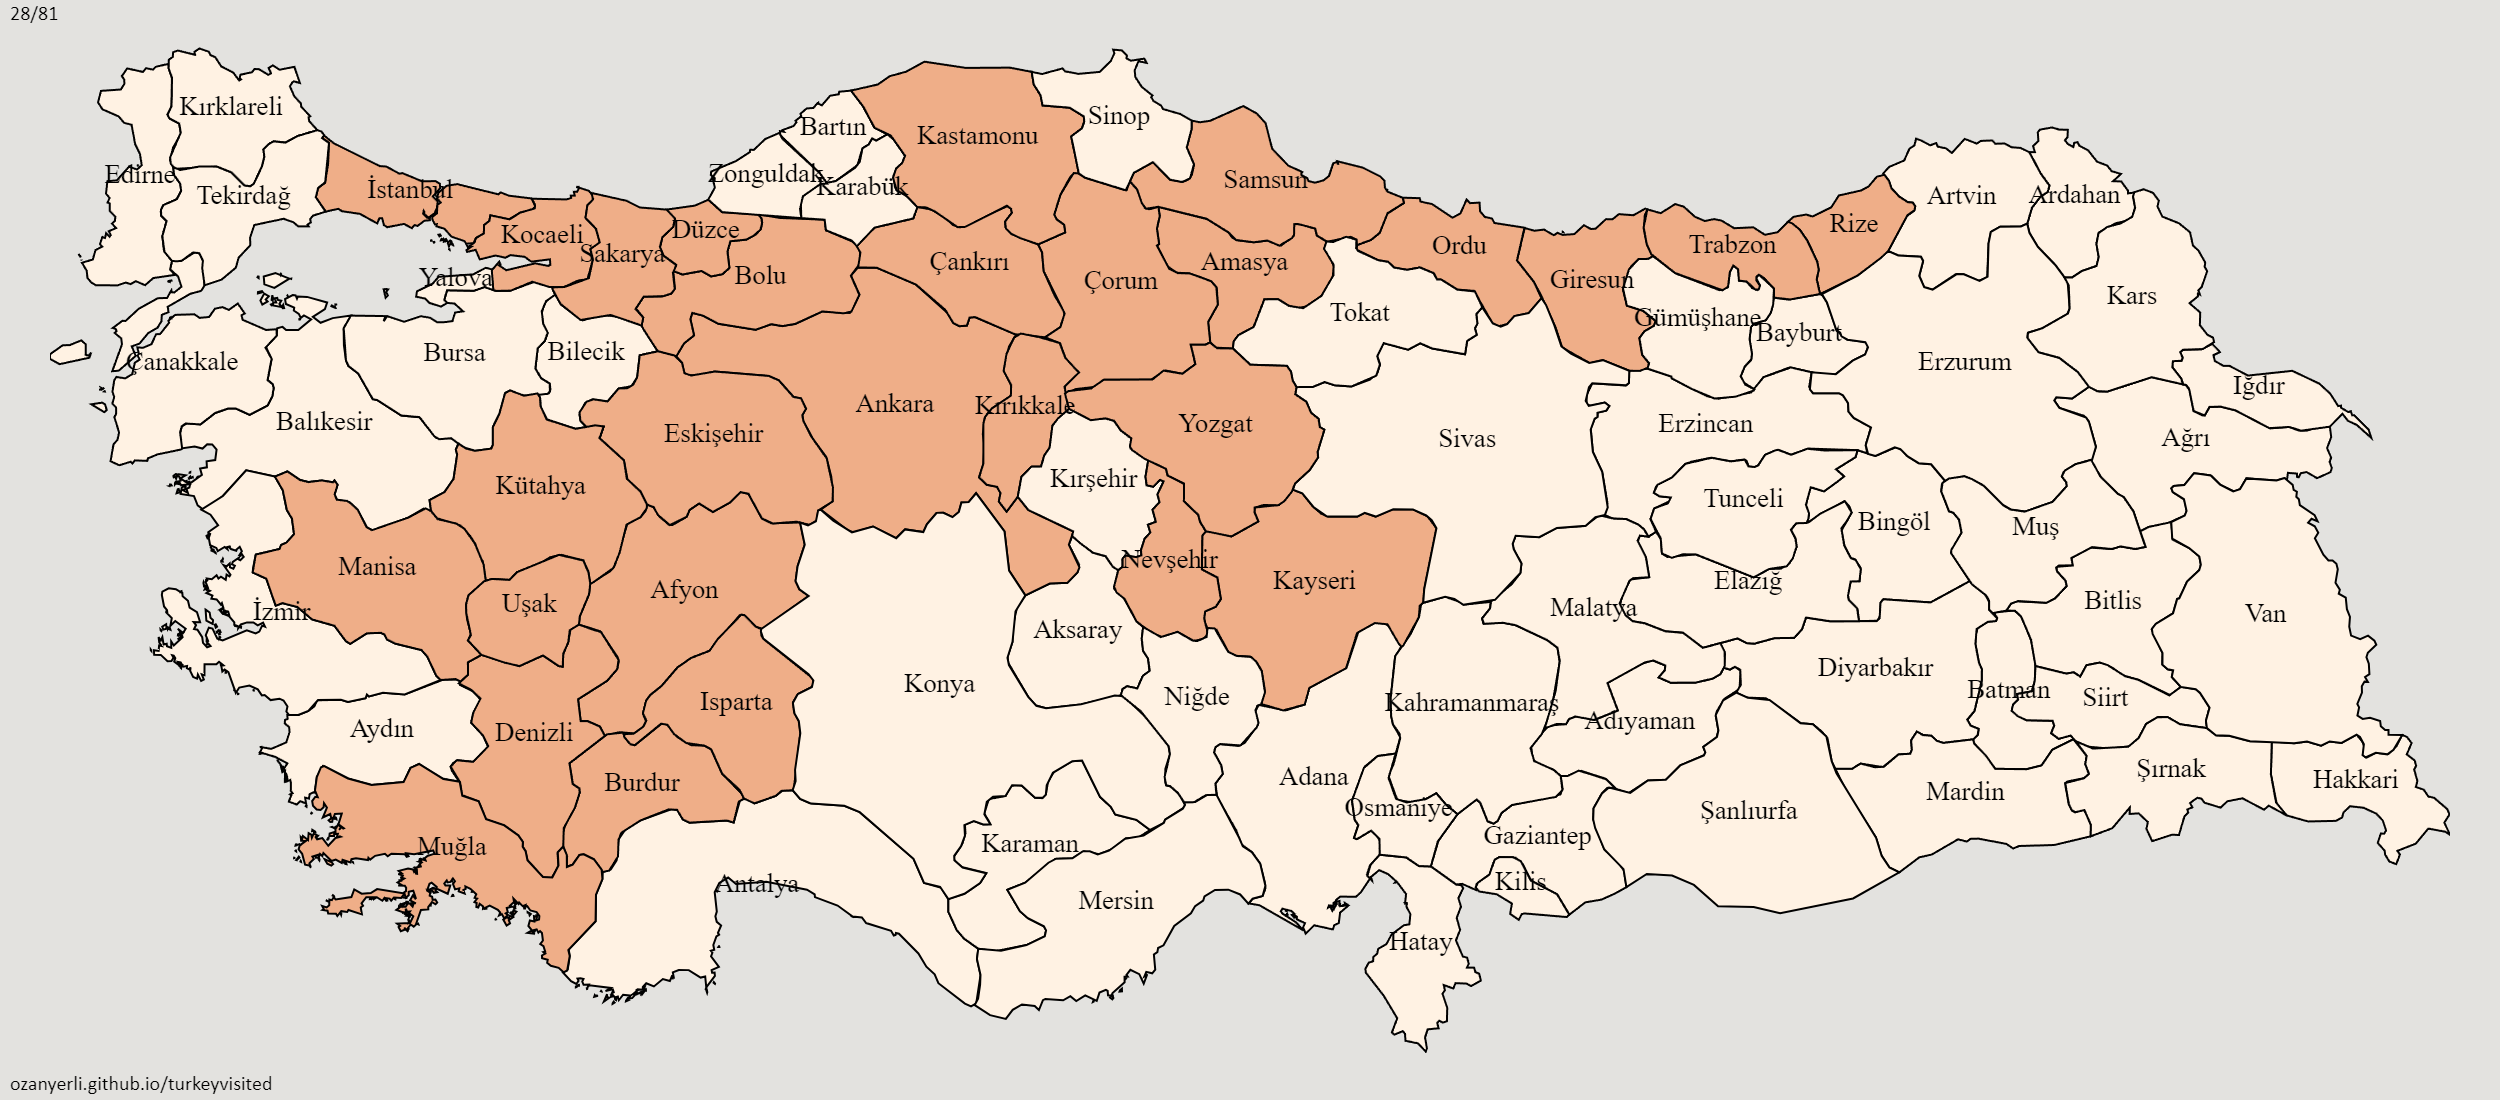 turkeyvisited (1).png